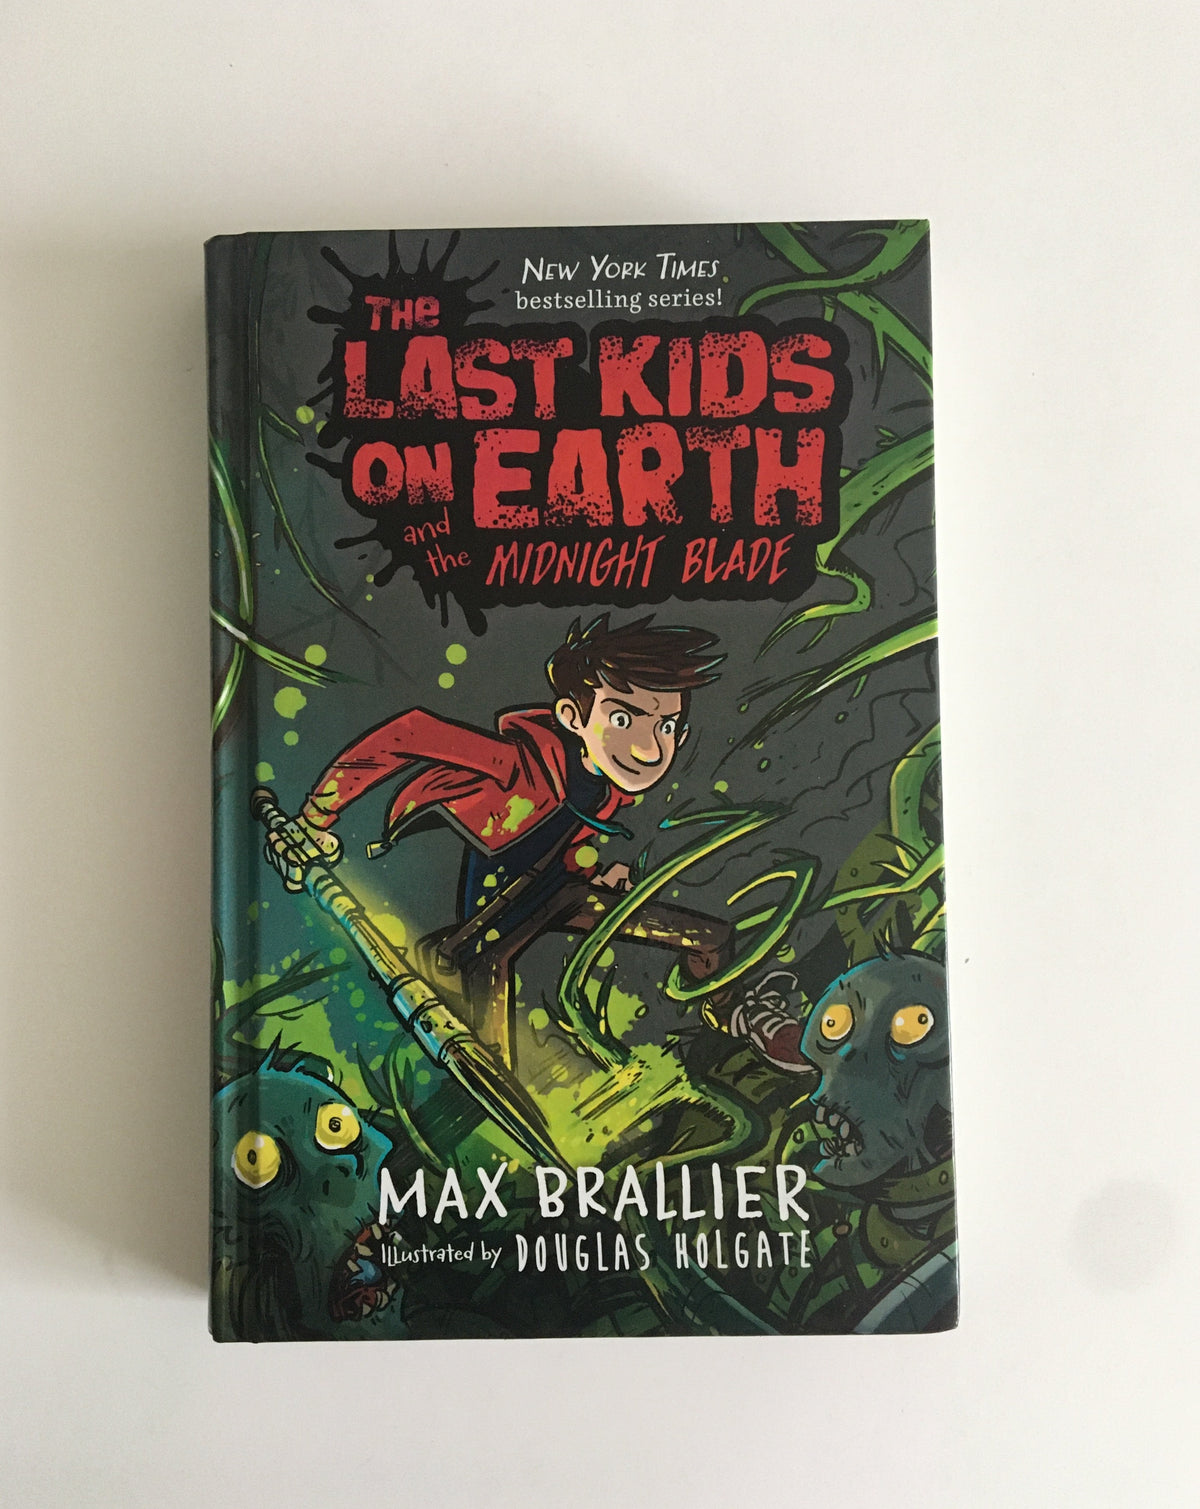 The Last Kids on Earth and the Midnight Blade by Max Brallier